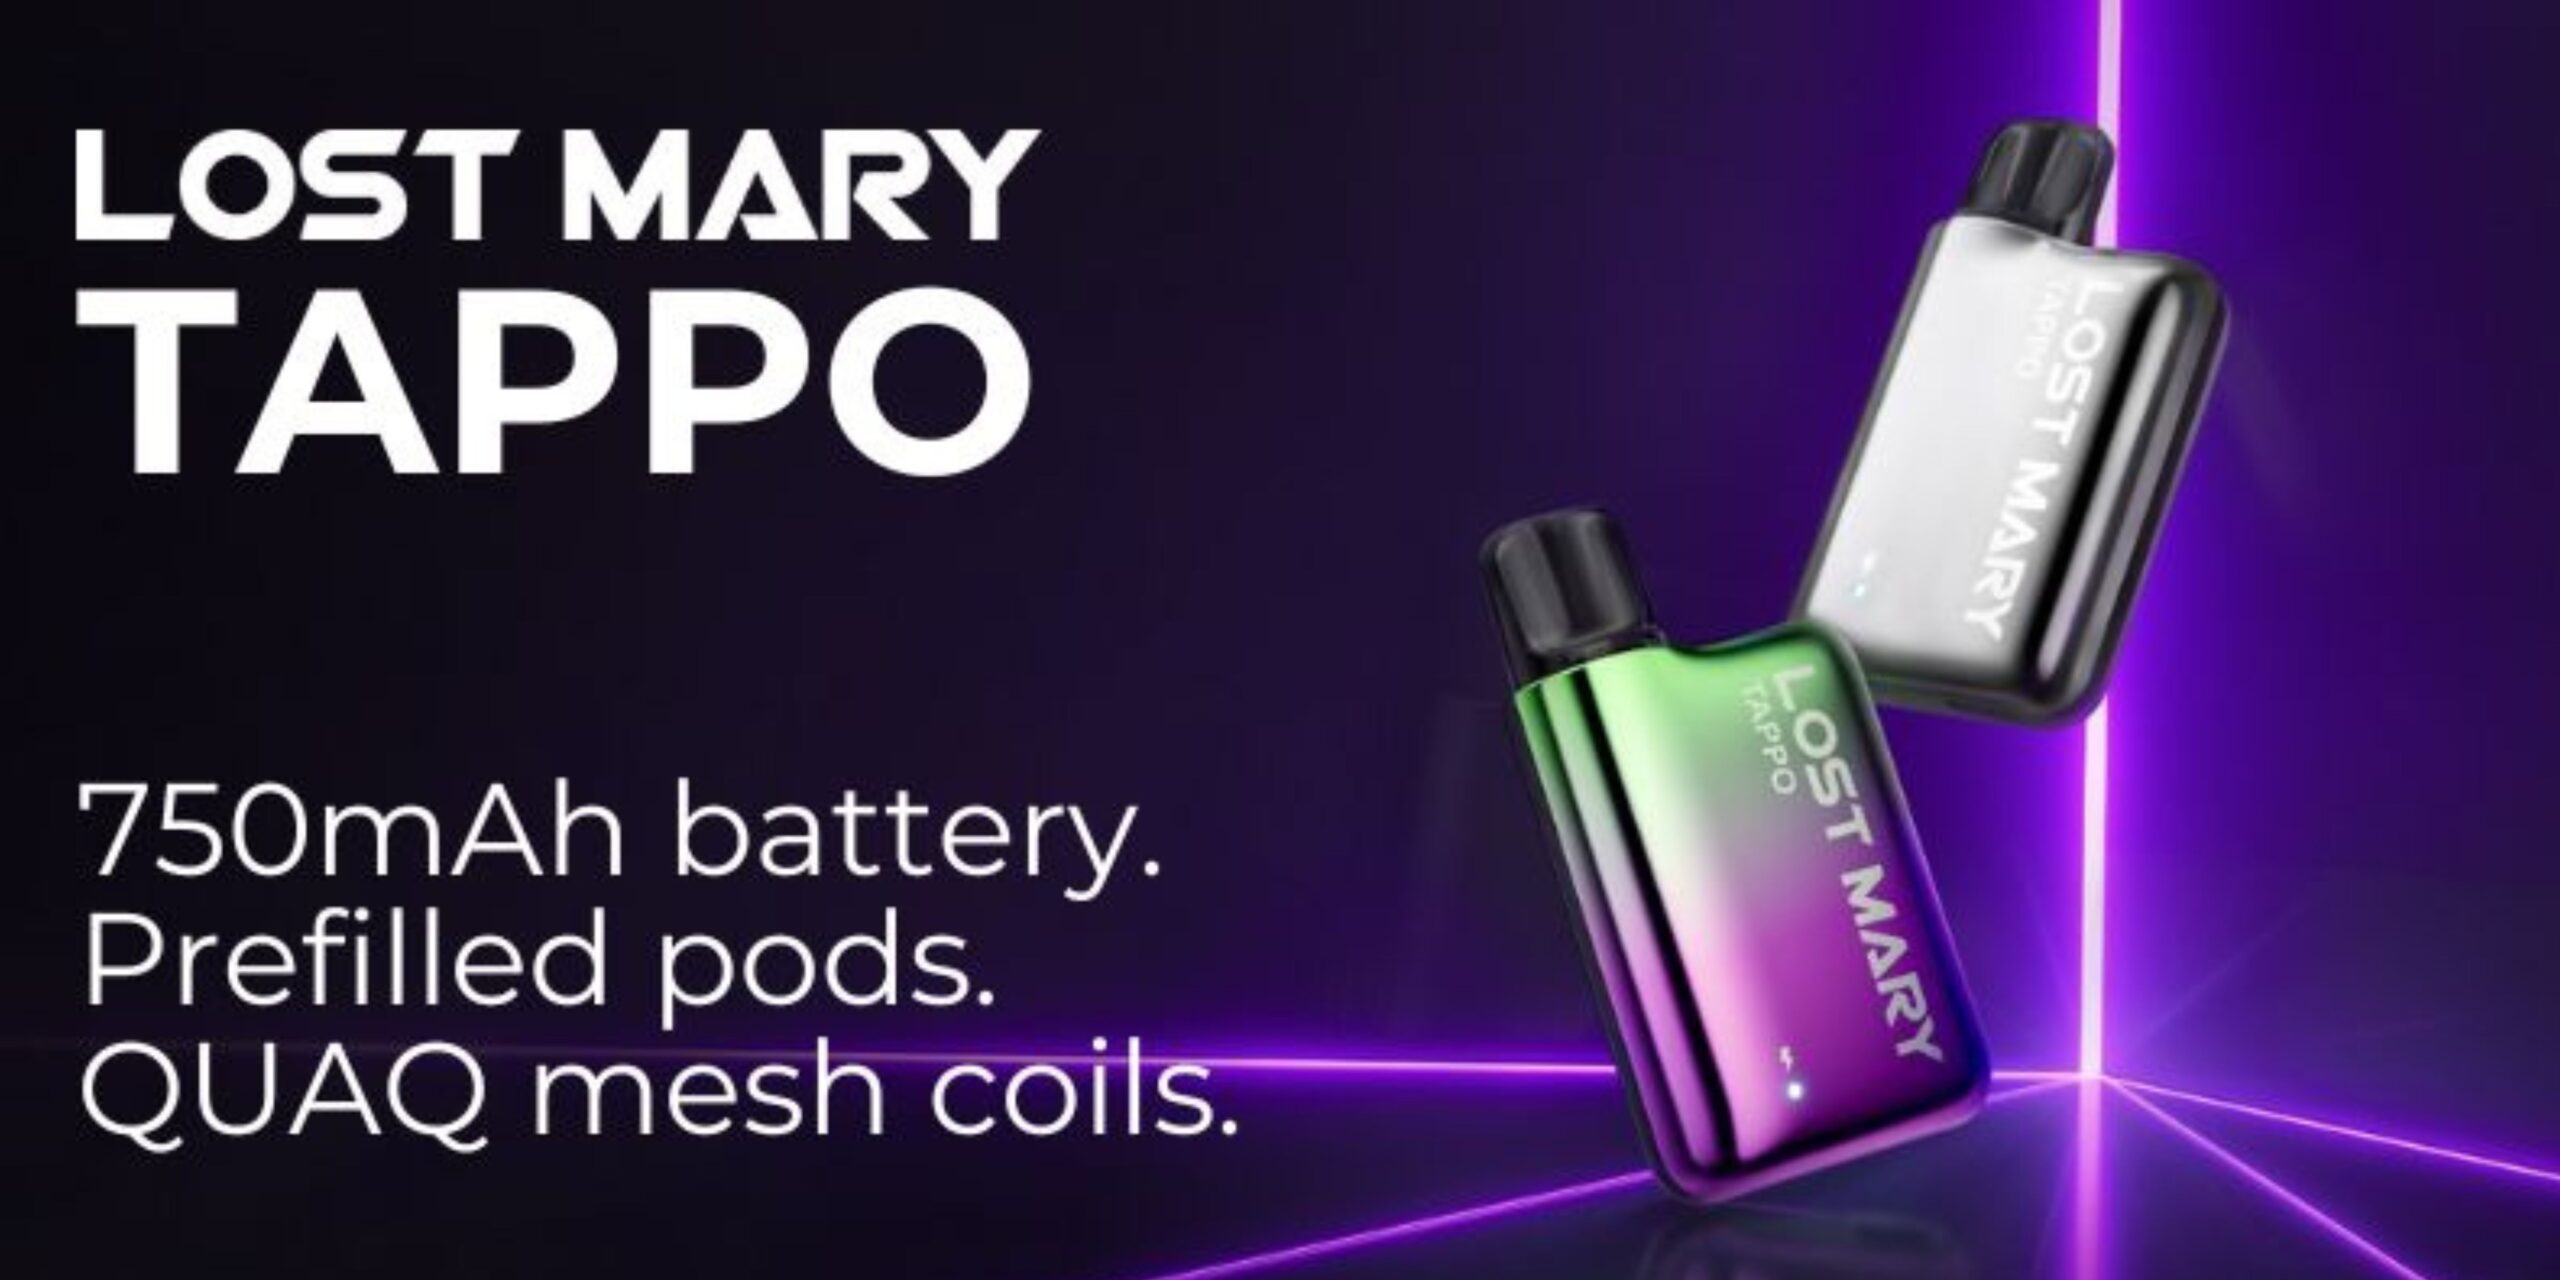 LOST MARY TAPPO – Strawberry Ice (Replacement Prefilled Pods) VAPING - XMANIA Ireland 14